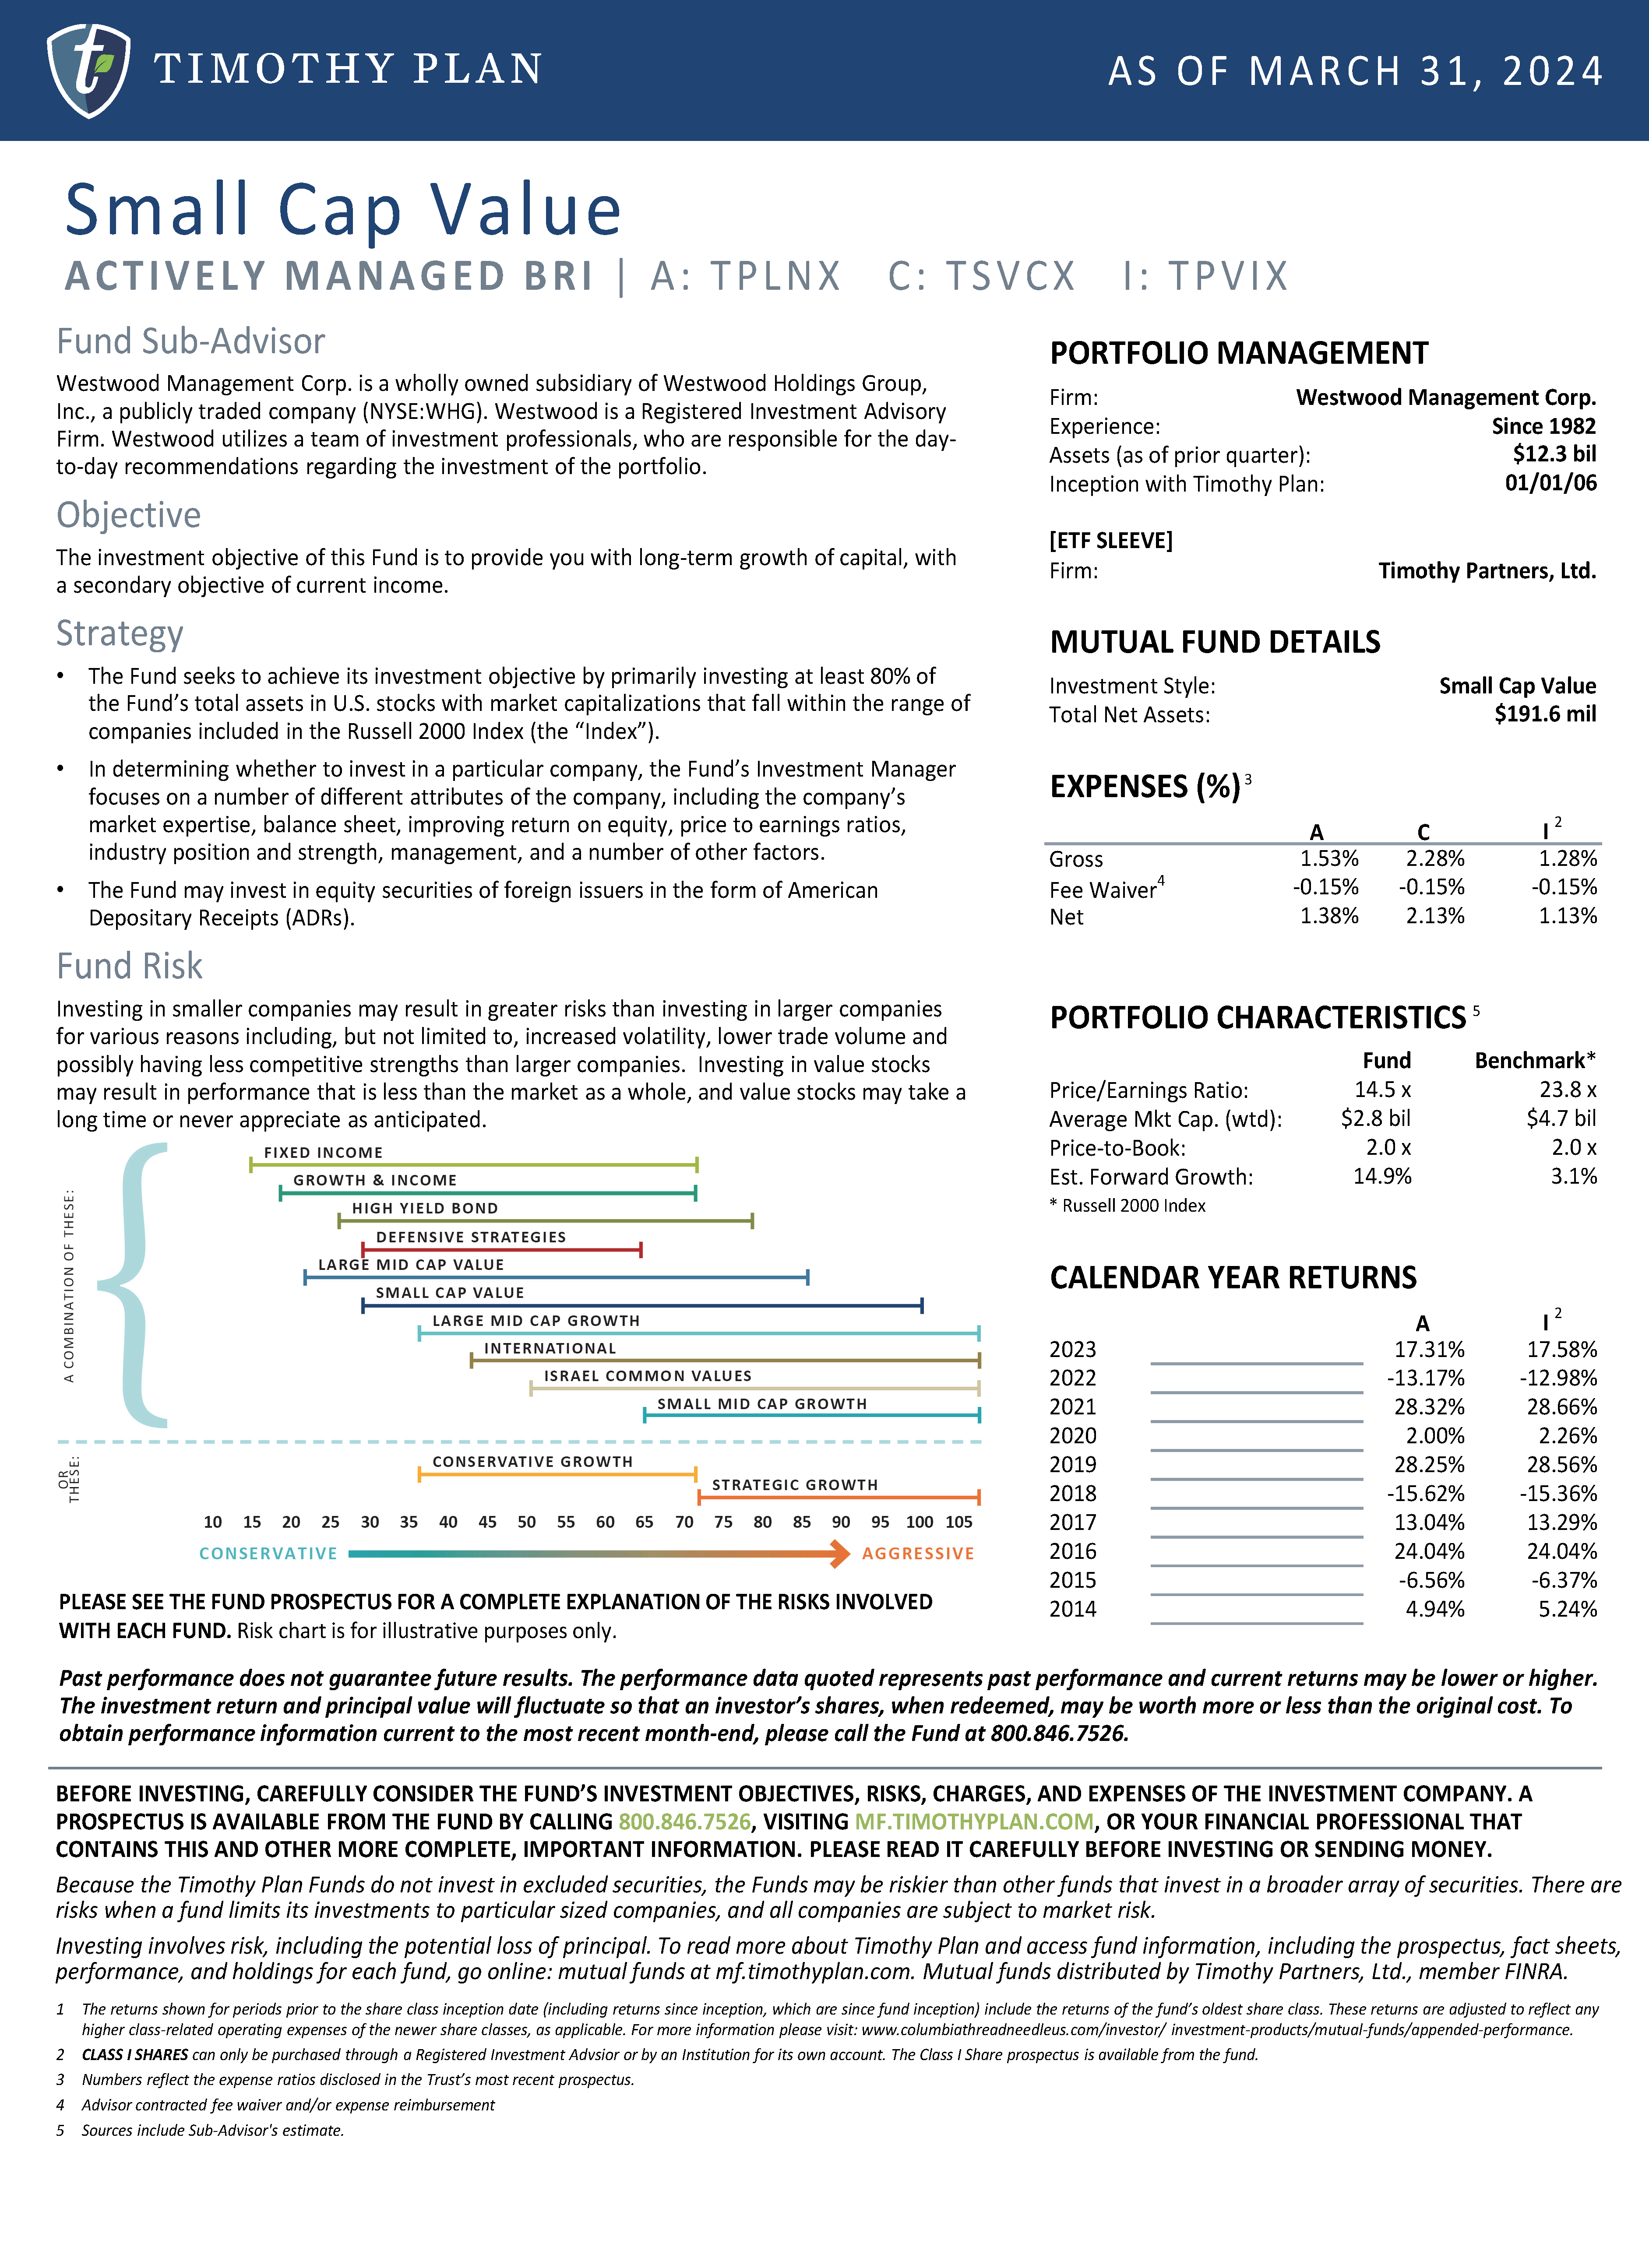 Small Cap Value page 2